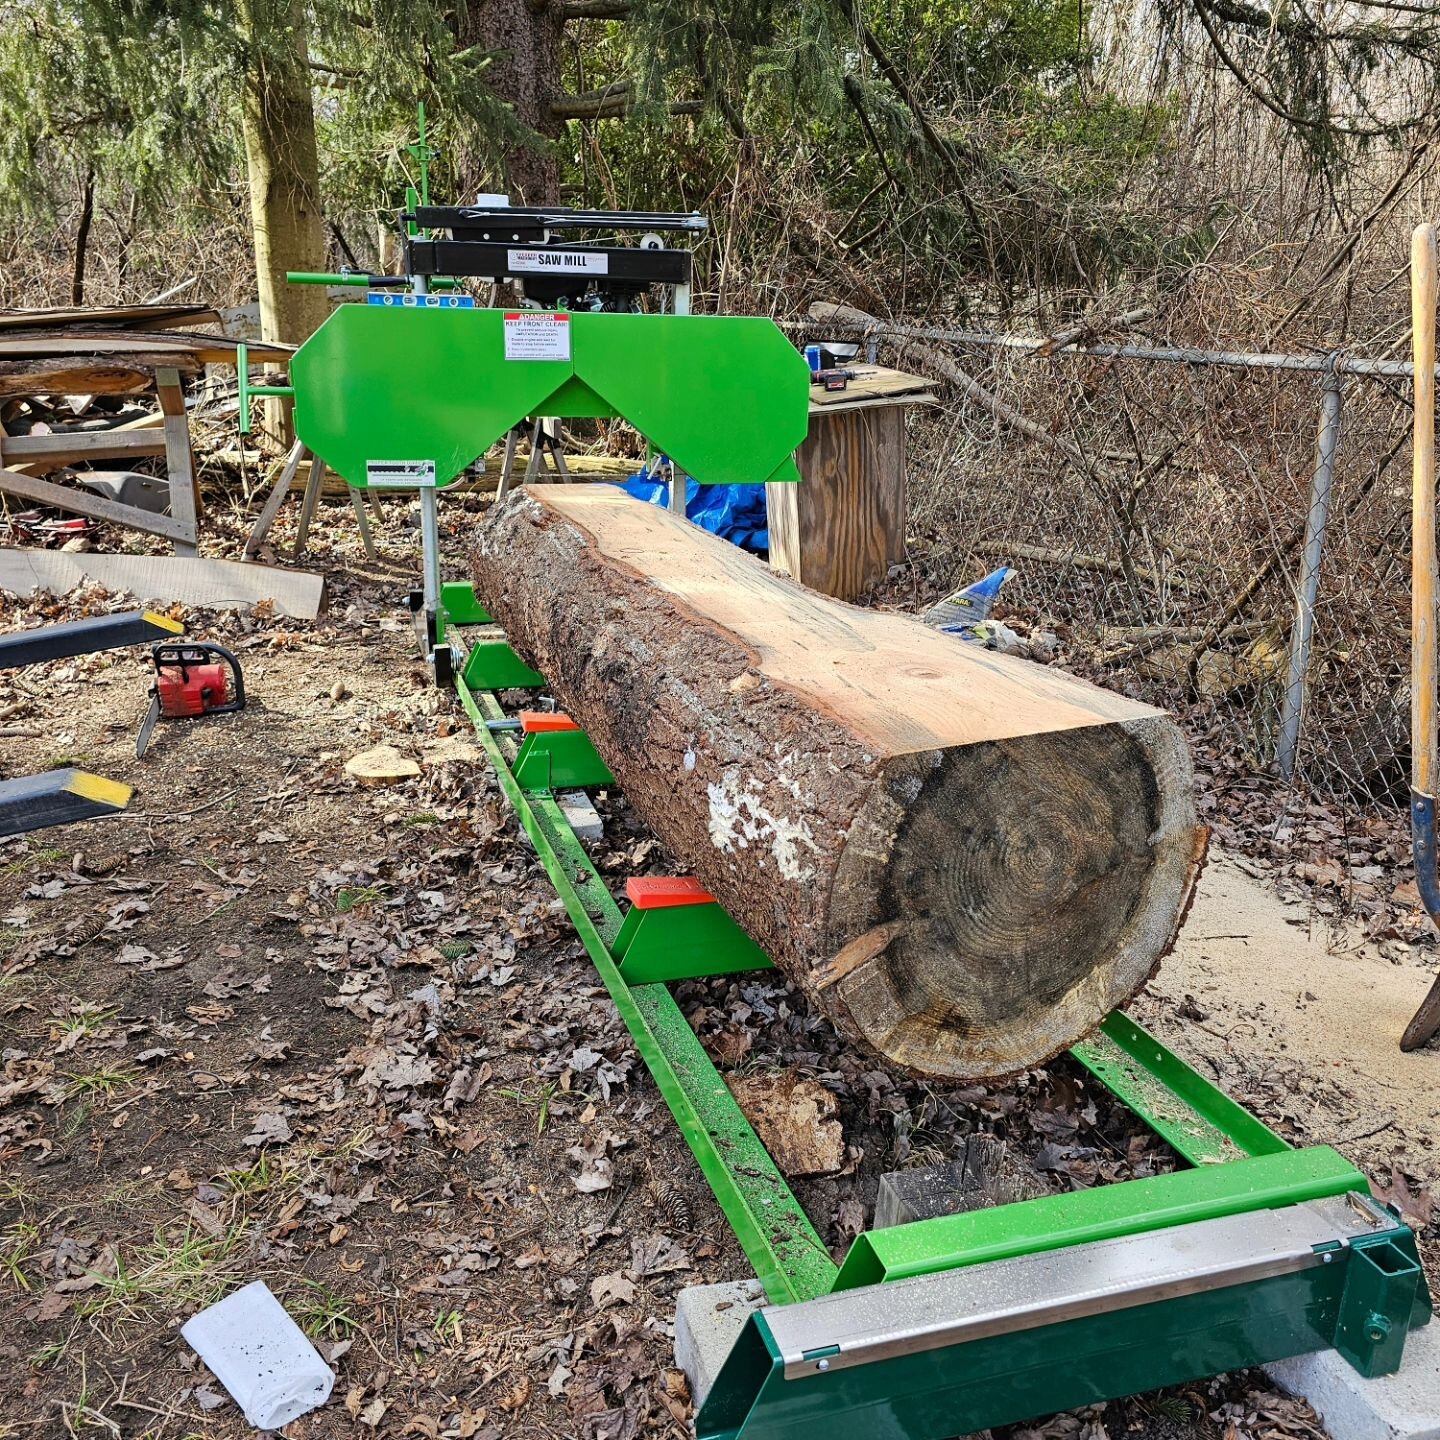 #harborfreight getting a workout today in the nice weather. Lots of 10/4 pine made. Side note, need to make counter weight for tractor... #sawmill